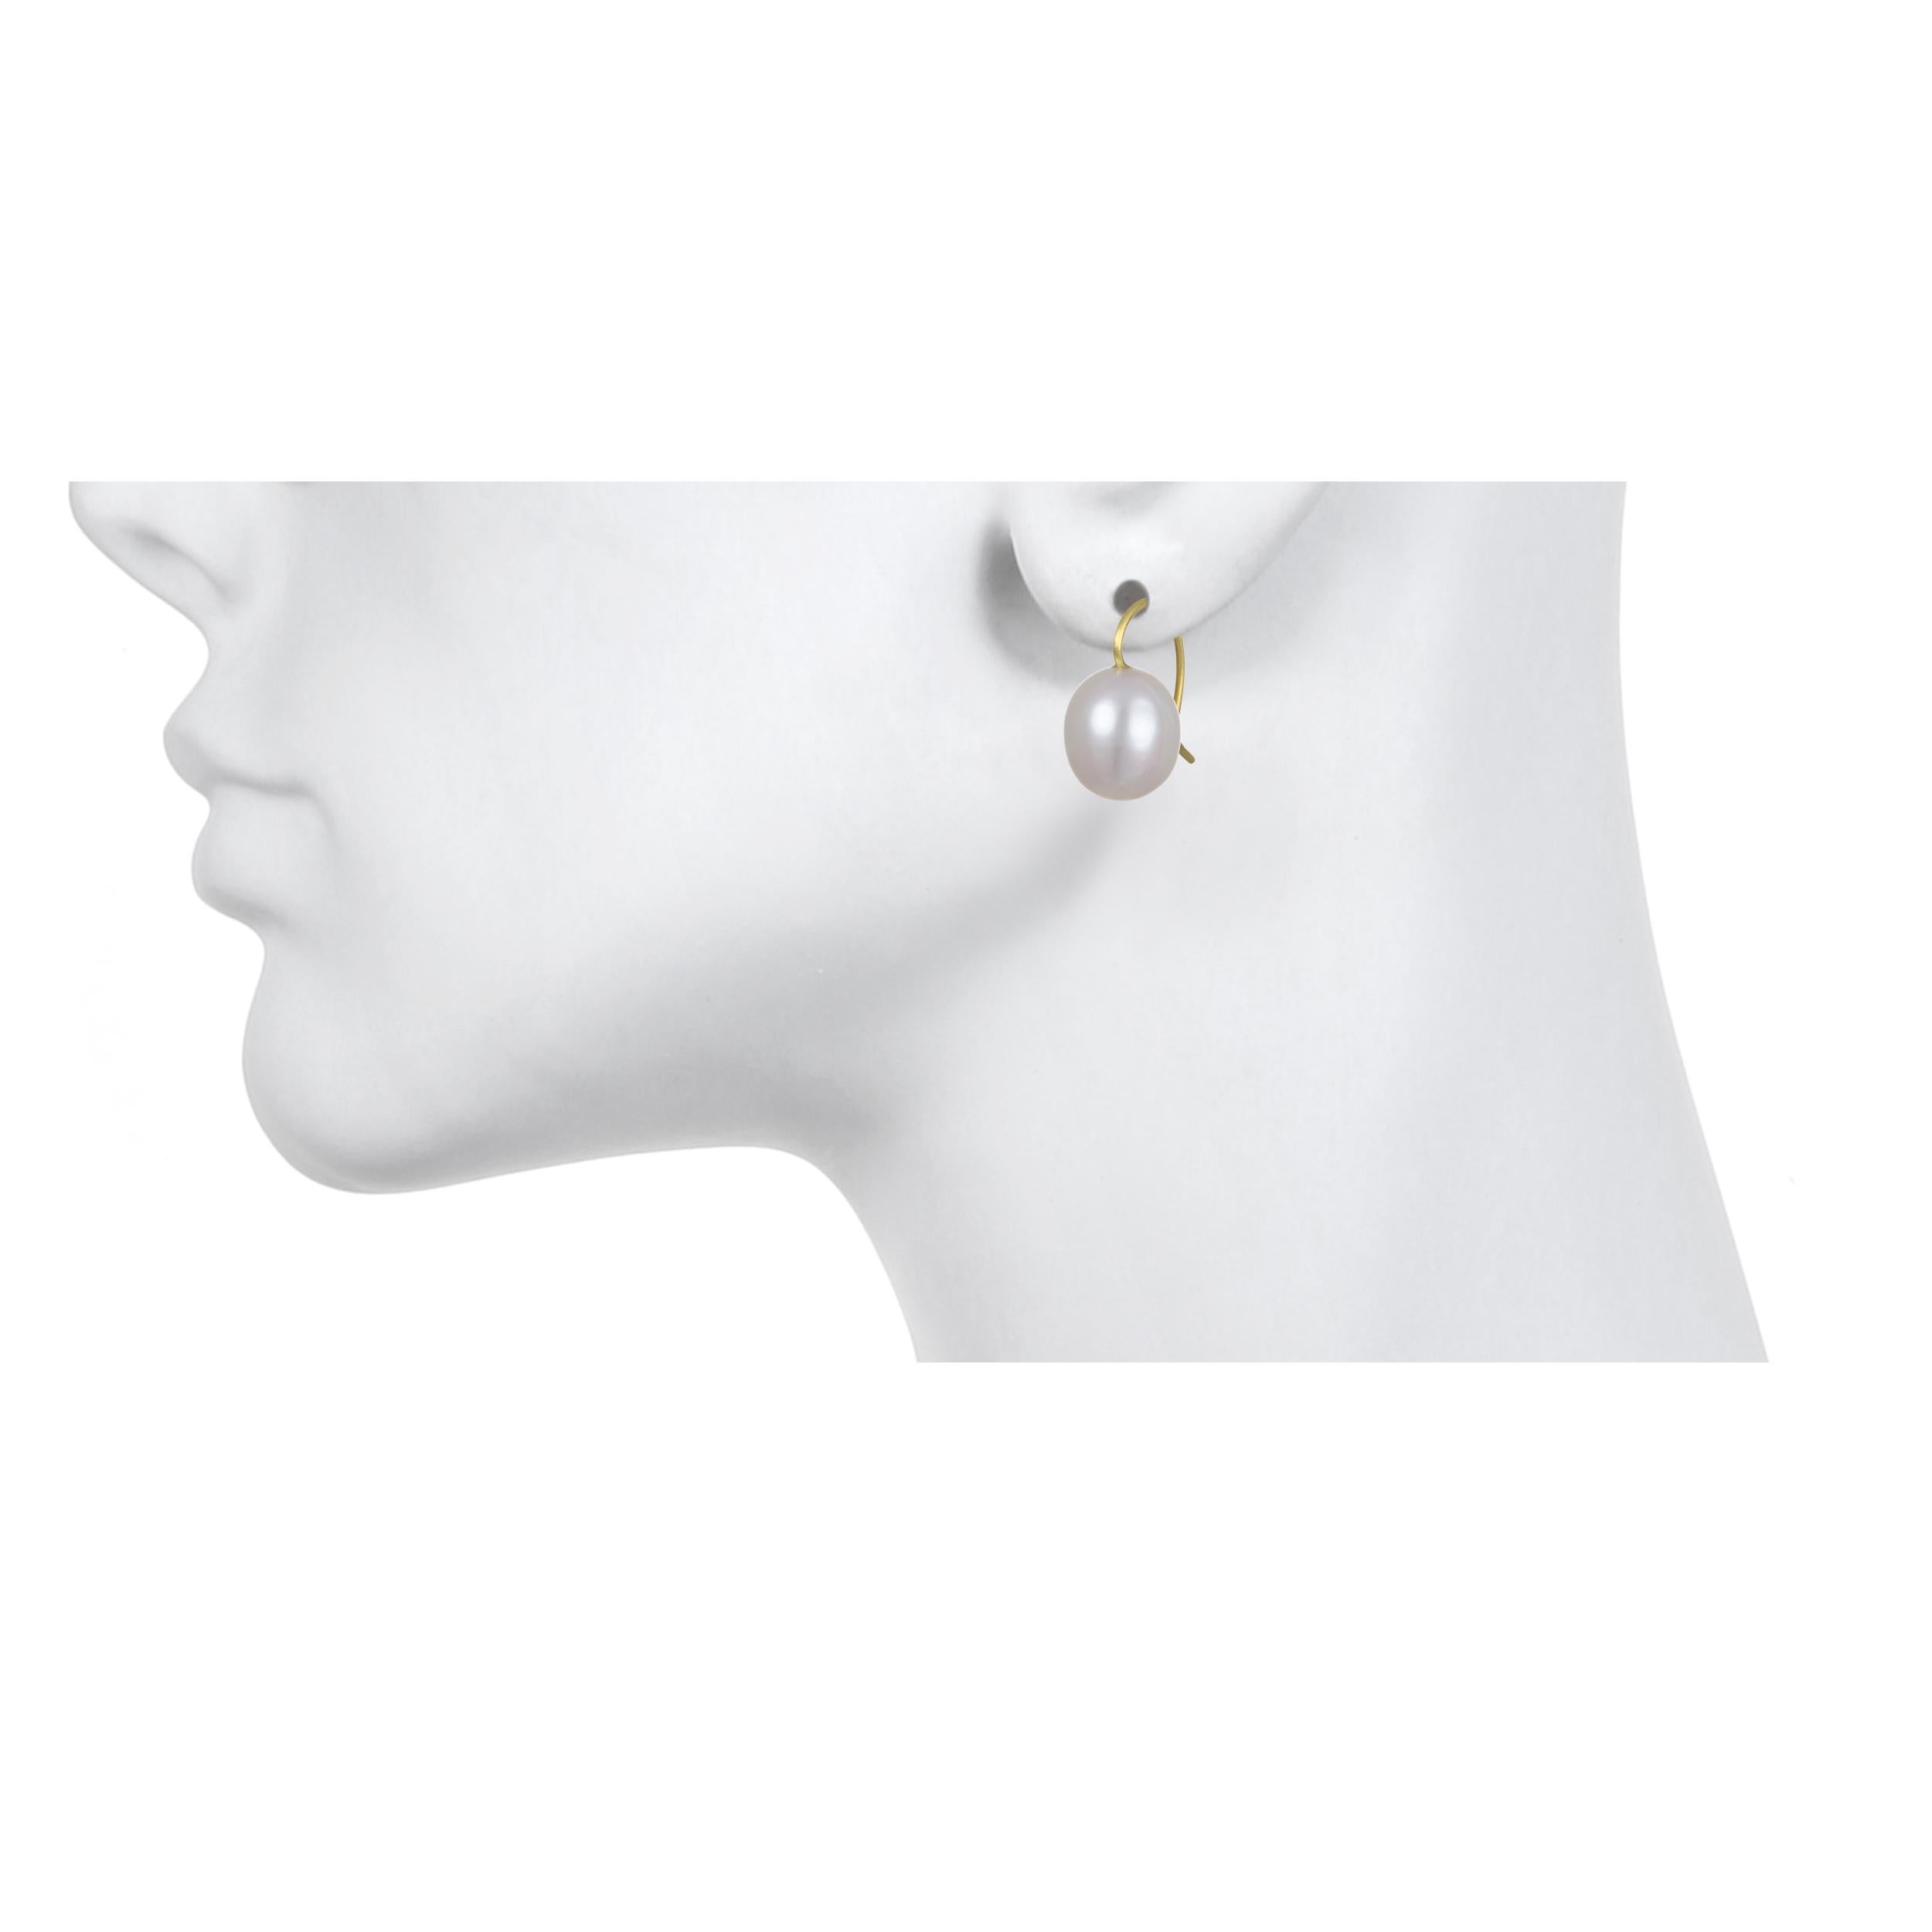 A perennial favorite is Faye Kim's  perfectly simple pearl drop earrings.  White freshwater cultured pearl drops hang from 18k gold ear wires.  Designed to hang just below the earlobe for a classic, clean look with minimal movement, these will be